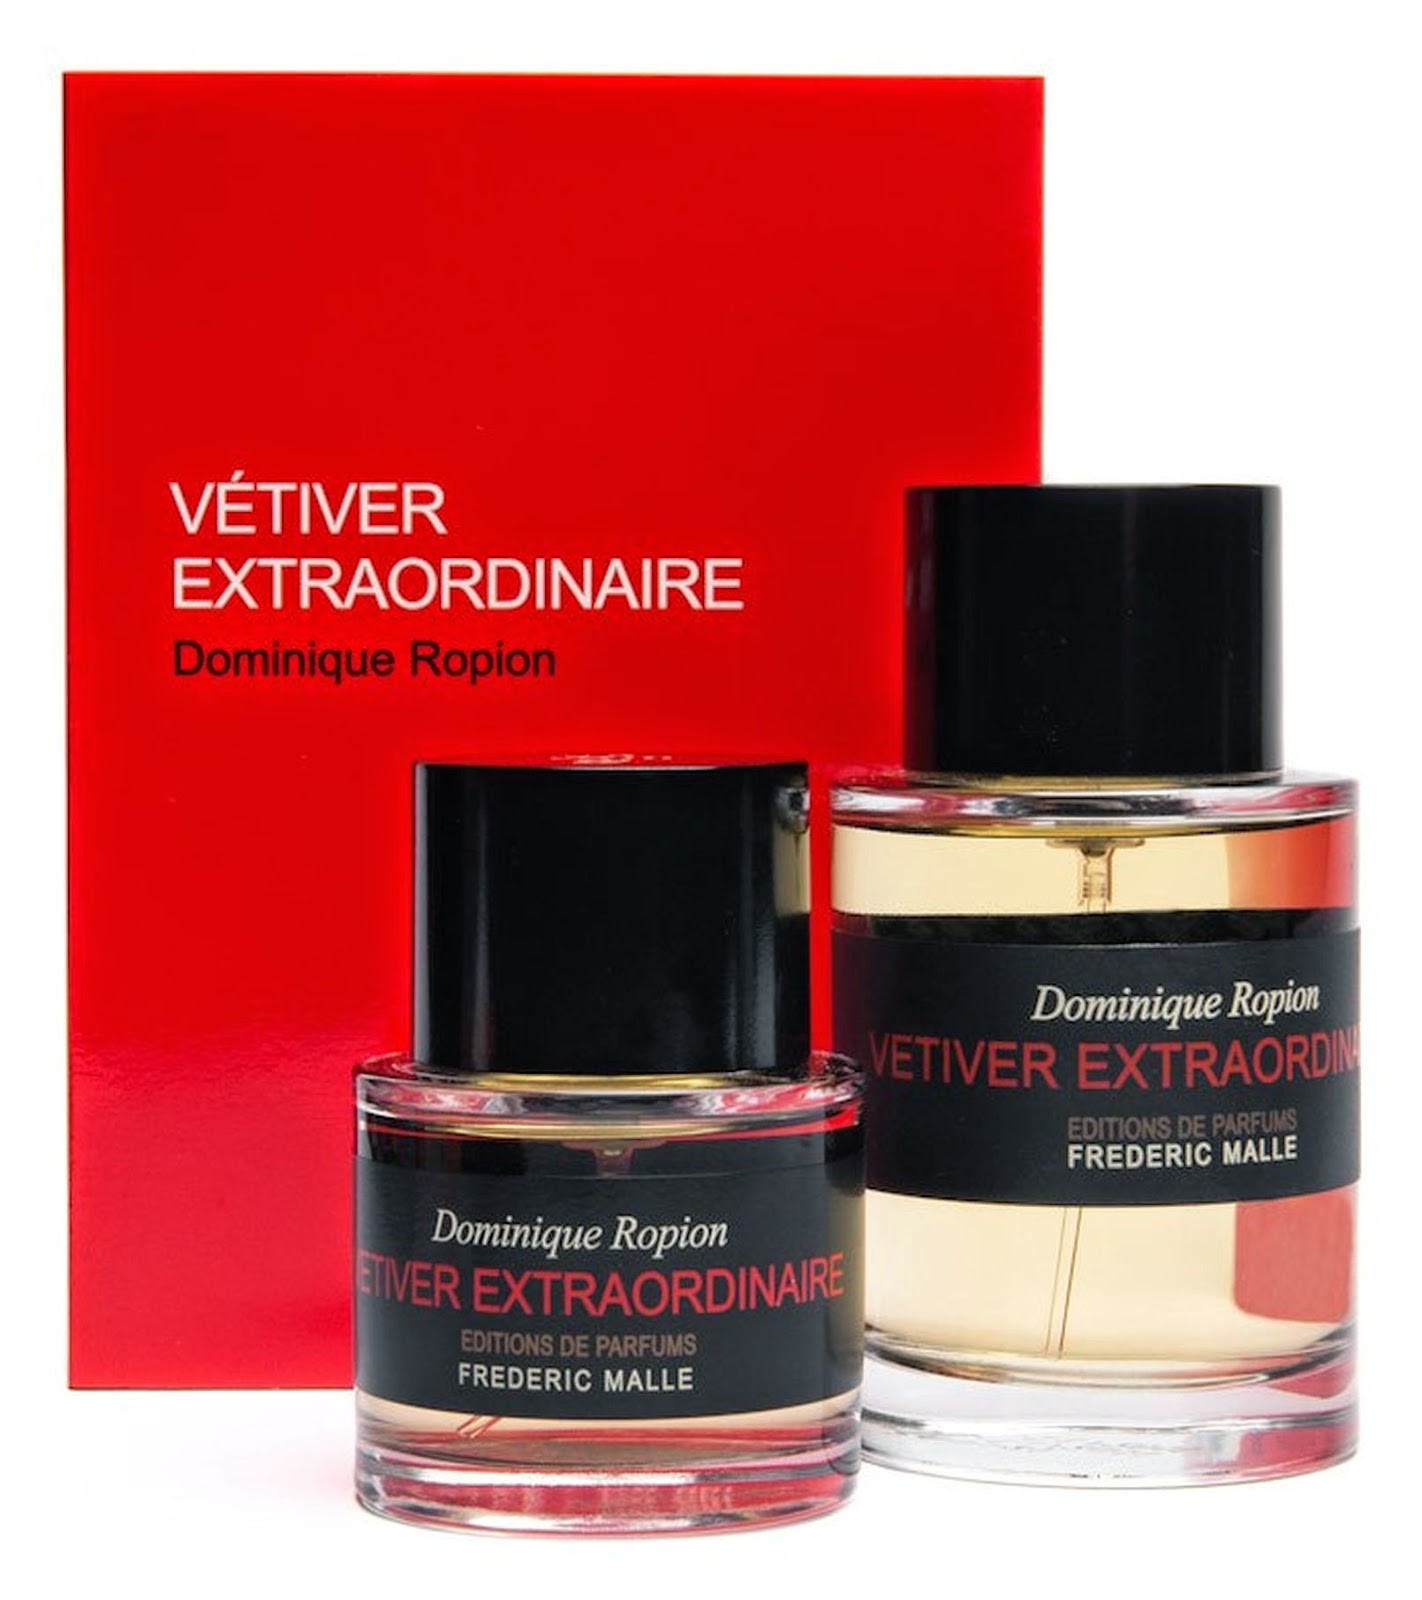 From Pyrgos: Vetiver Extraordinaire (Editions de Parfums Frederic Malle)